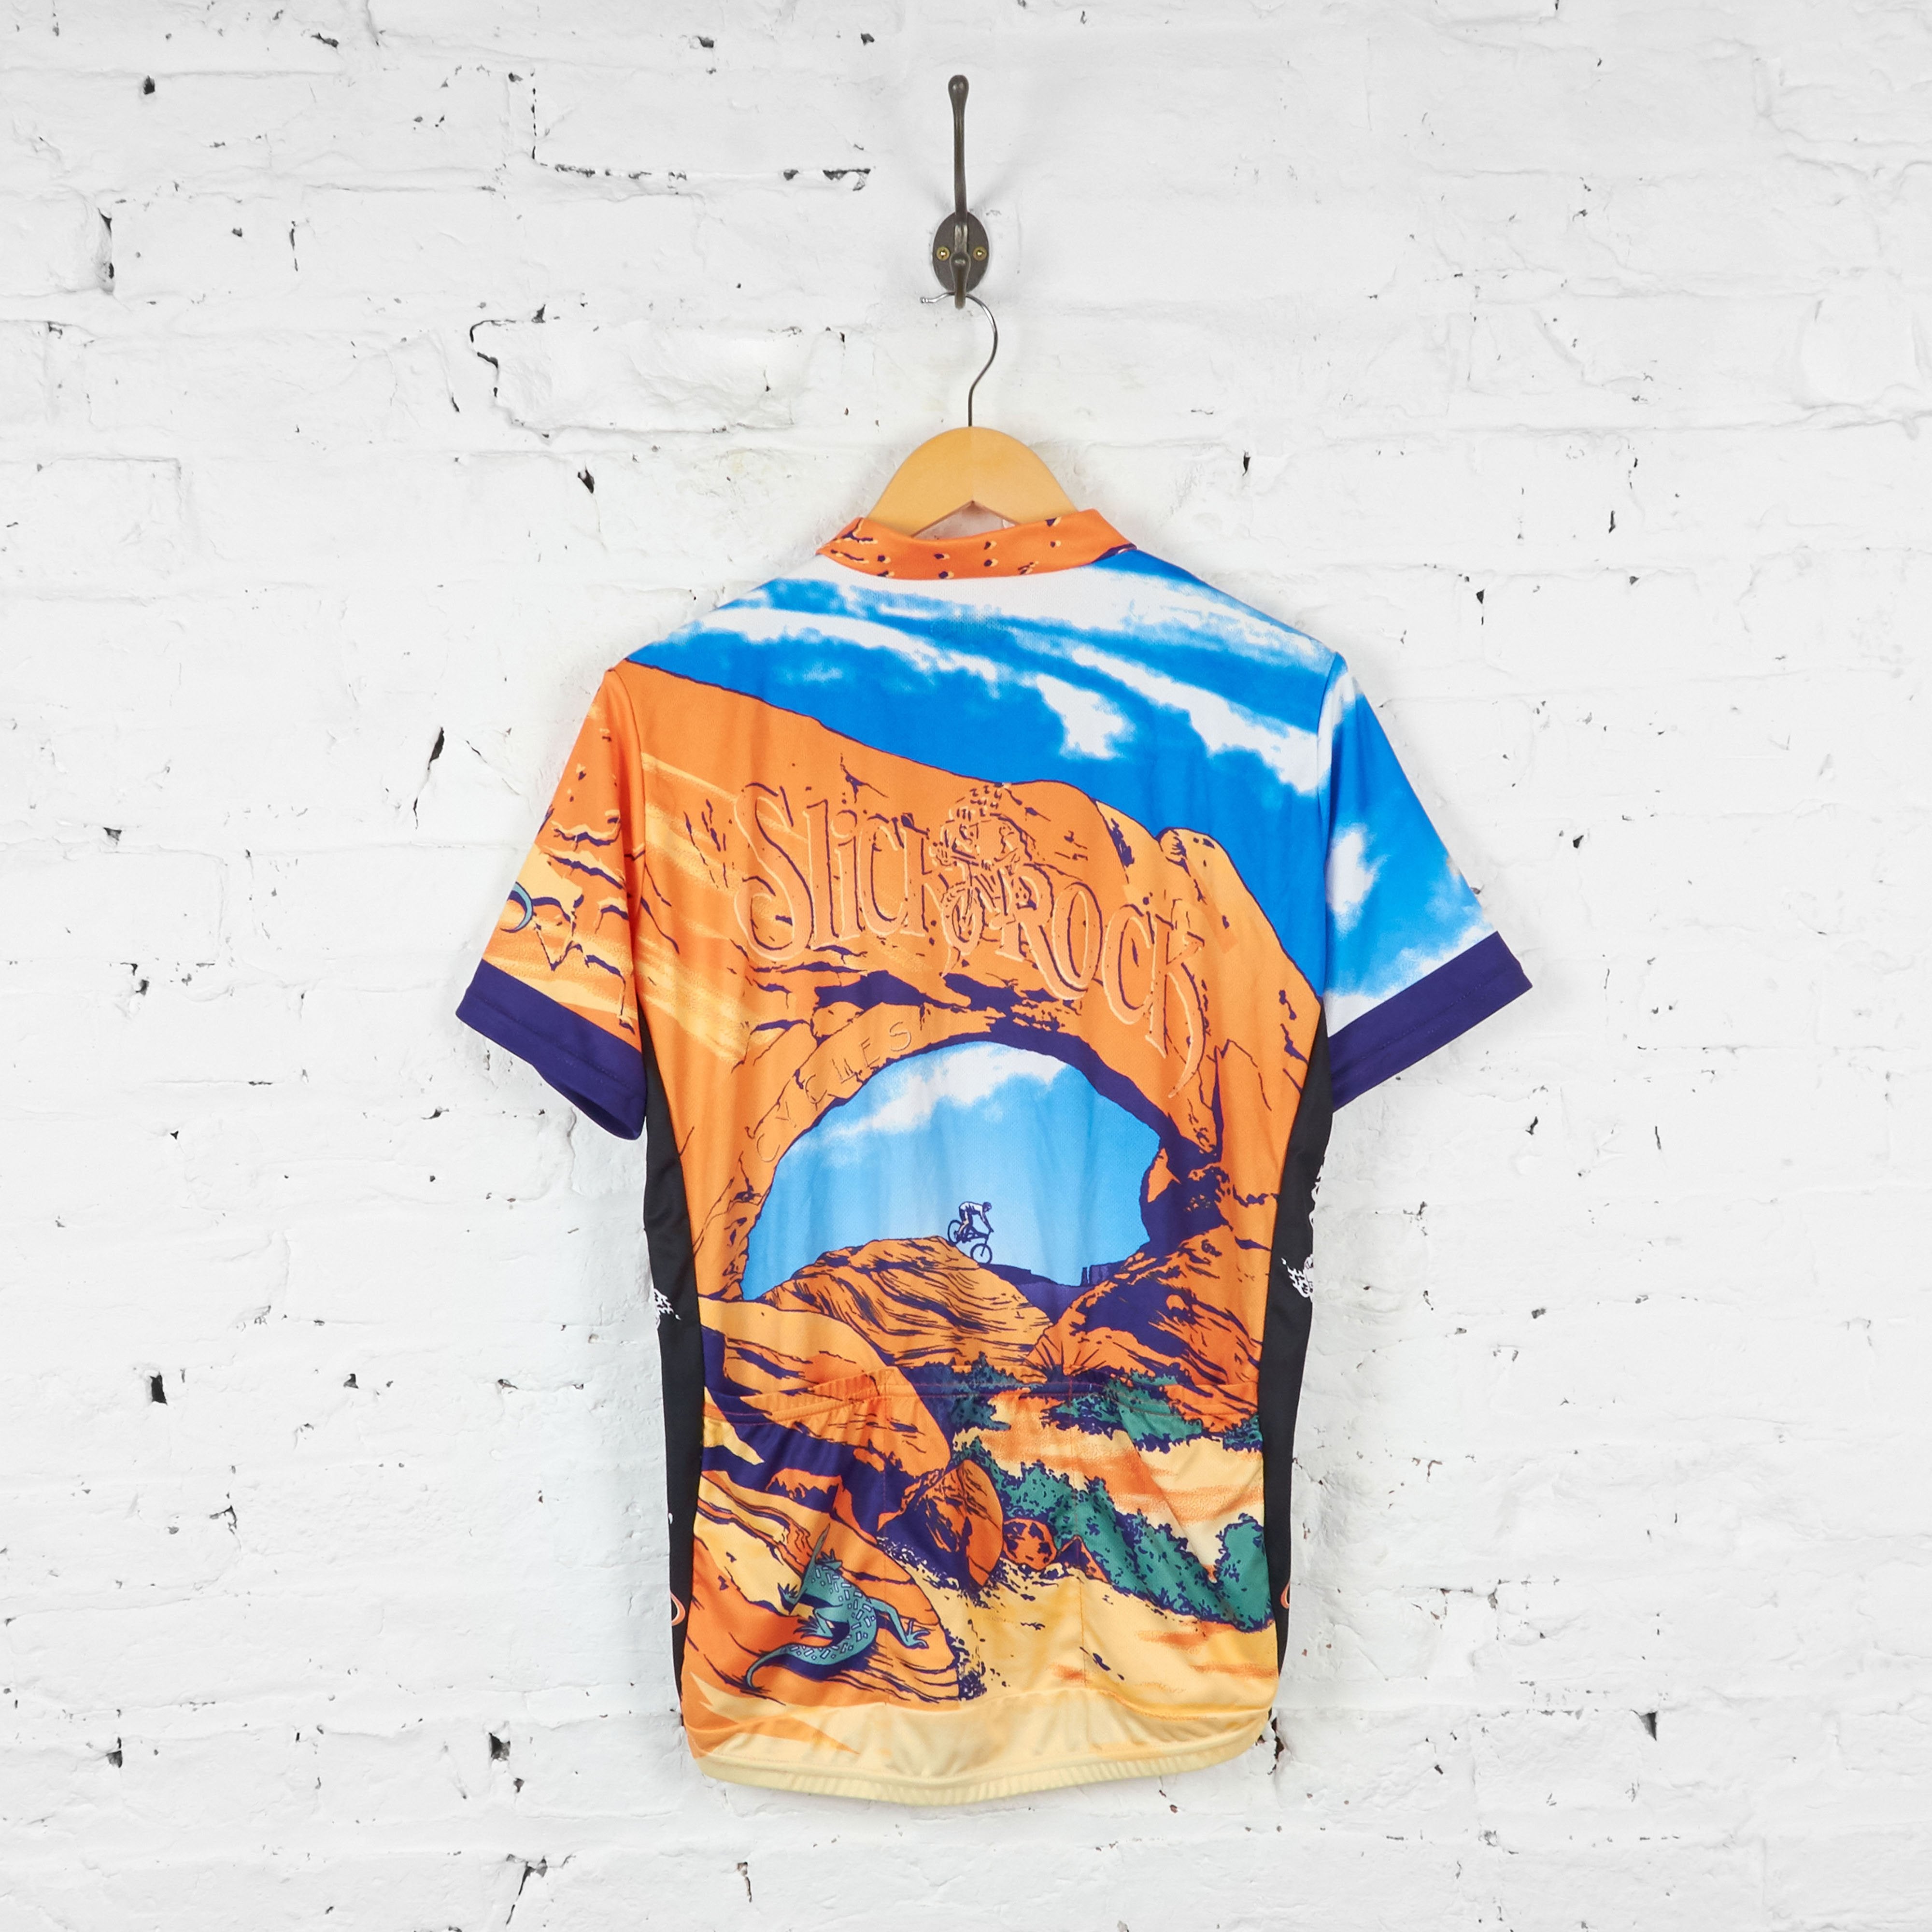 Primal Wear, Shirts & Tops, Cycling Jersey From Primal Wear